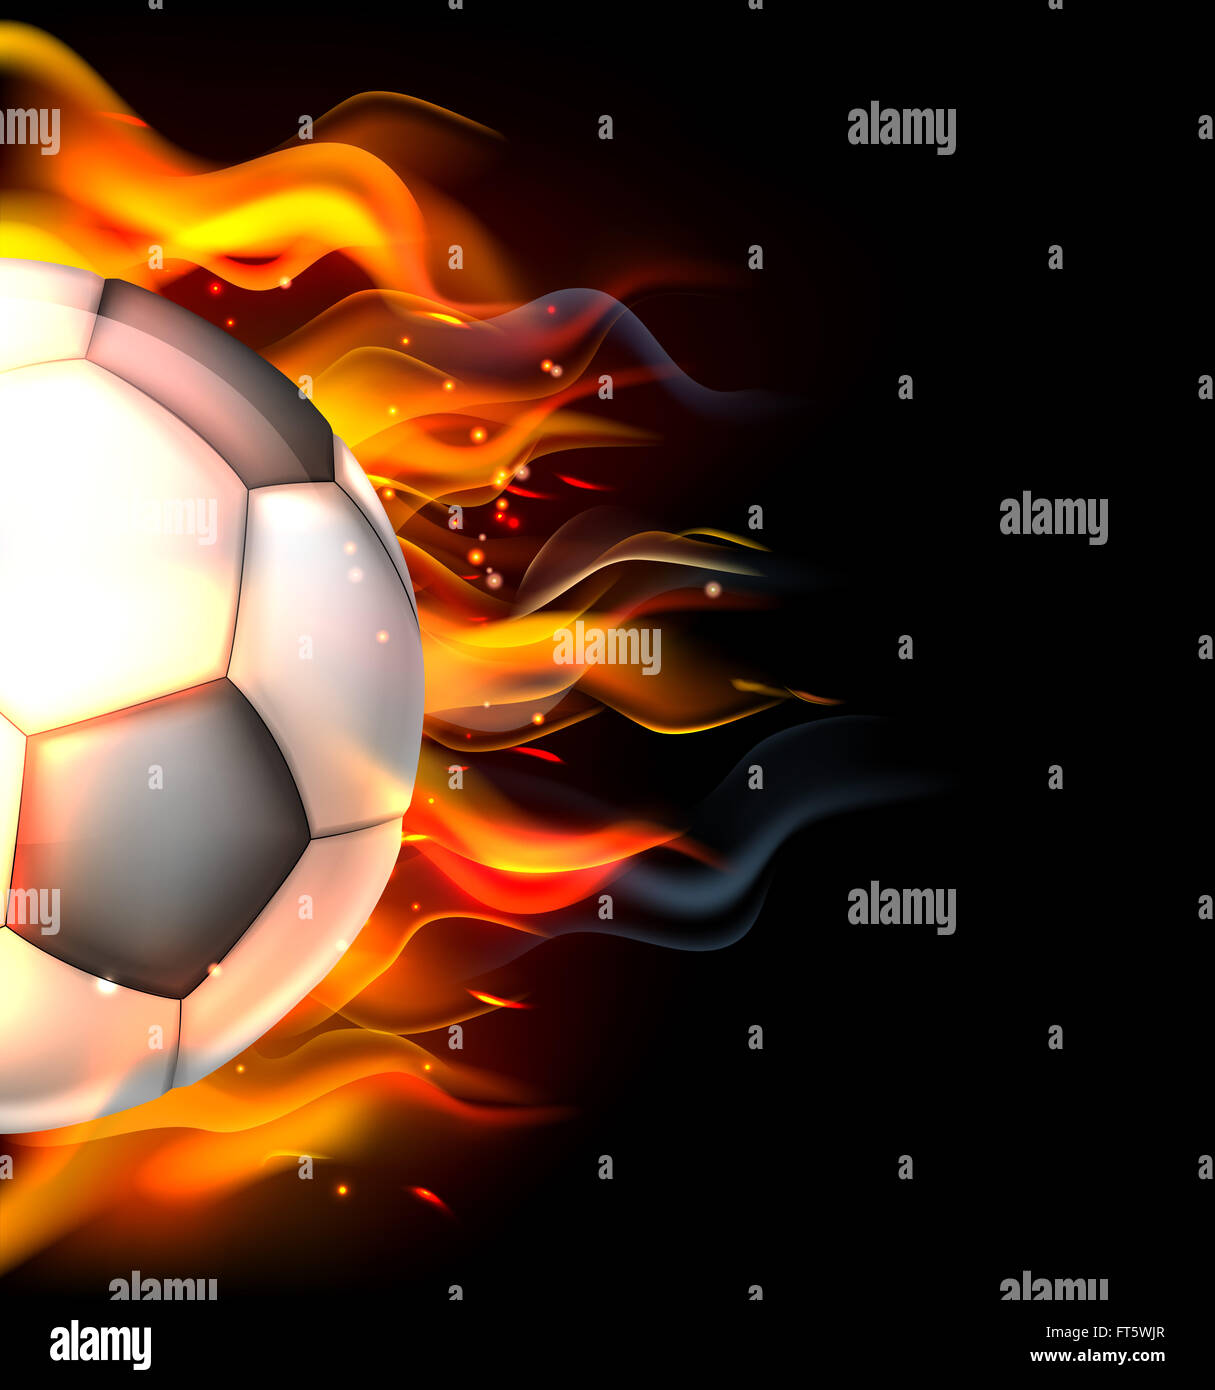 A flaming soccer football ball on fire concept Stock Photo